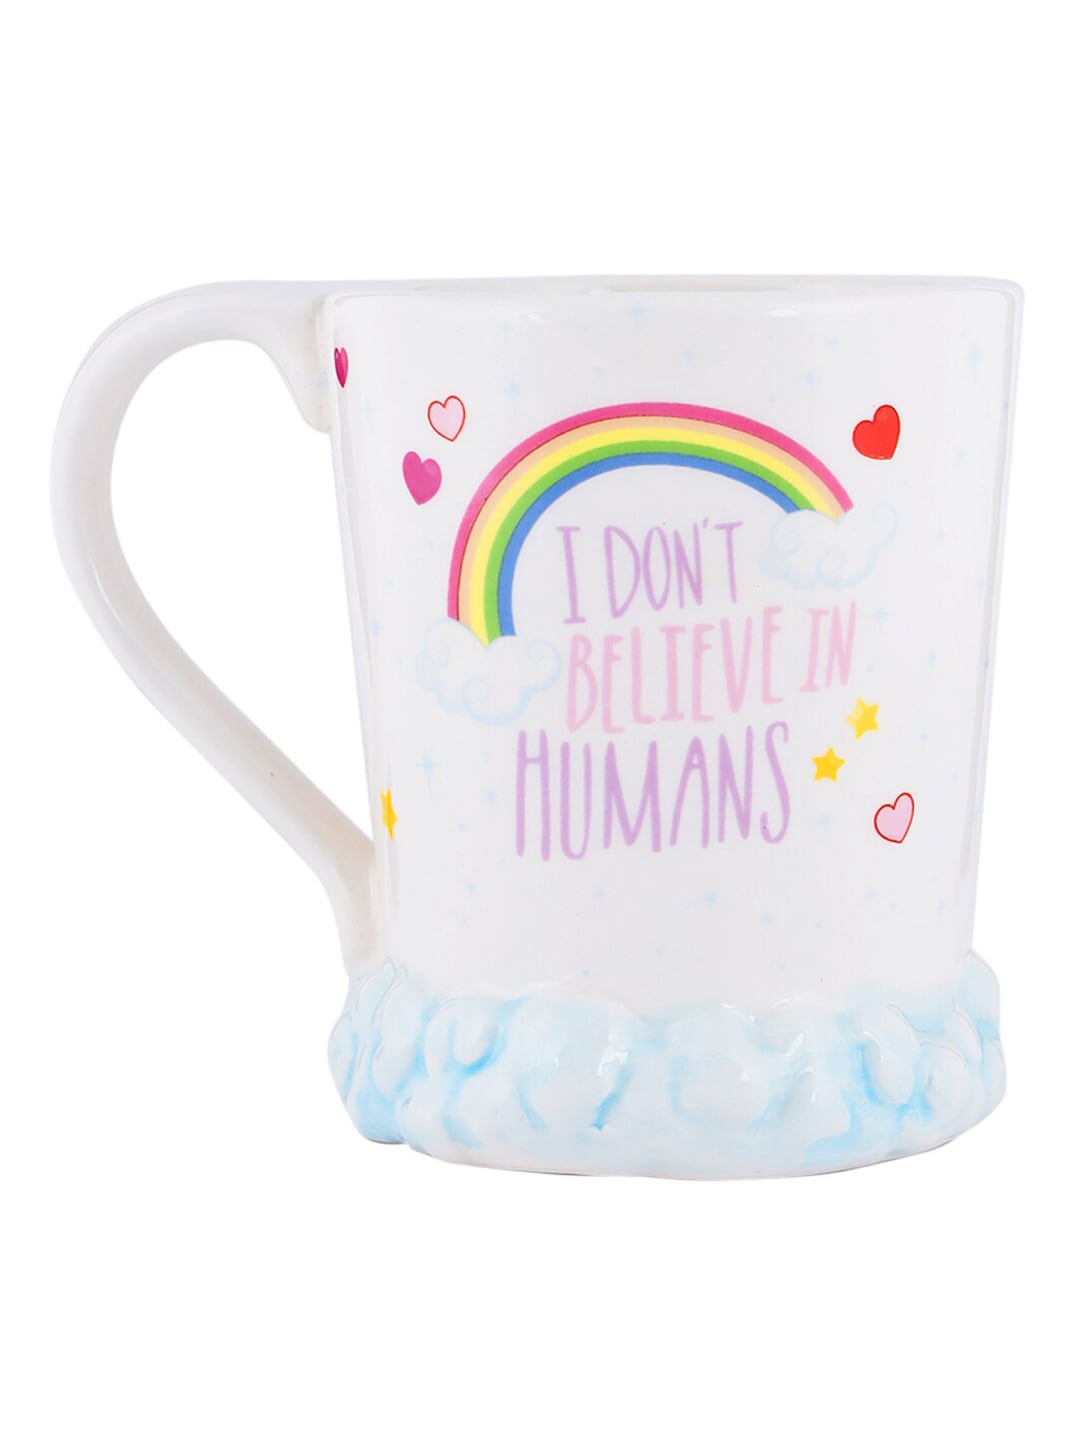 BonZeaL White & Yellow 3D Unicorn Cloud Printed Ceramic Glossy Cups Price in India